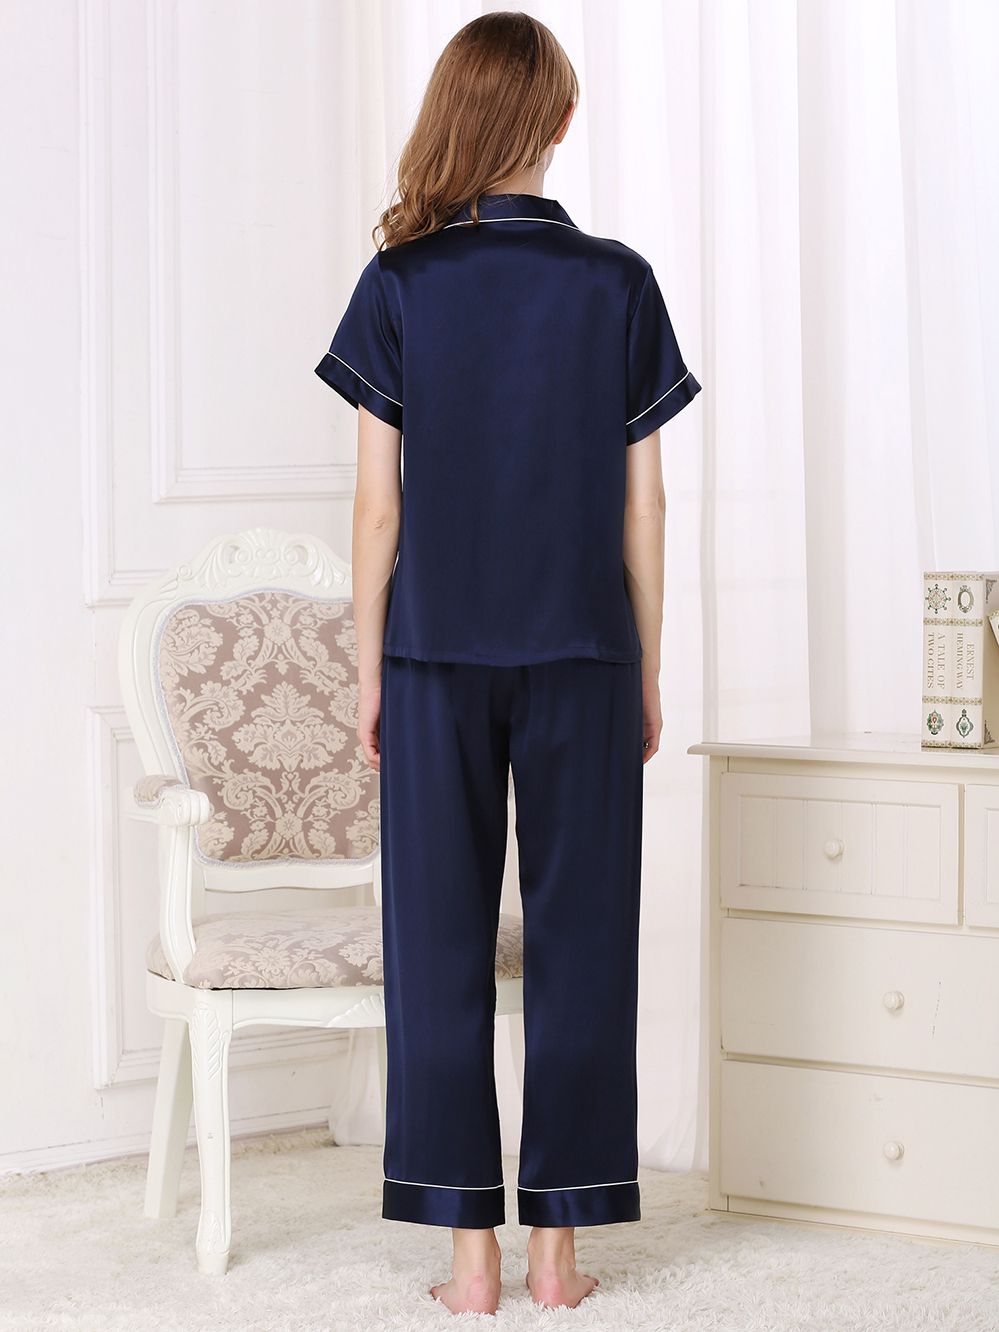 19 Momme Short Sleeved Silk Pajama Set with Trimming